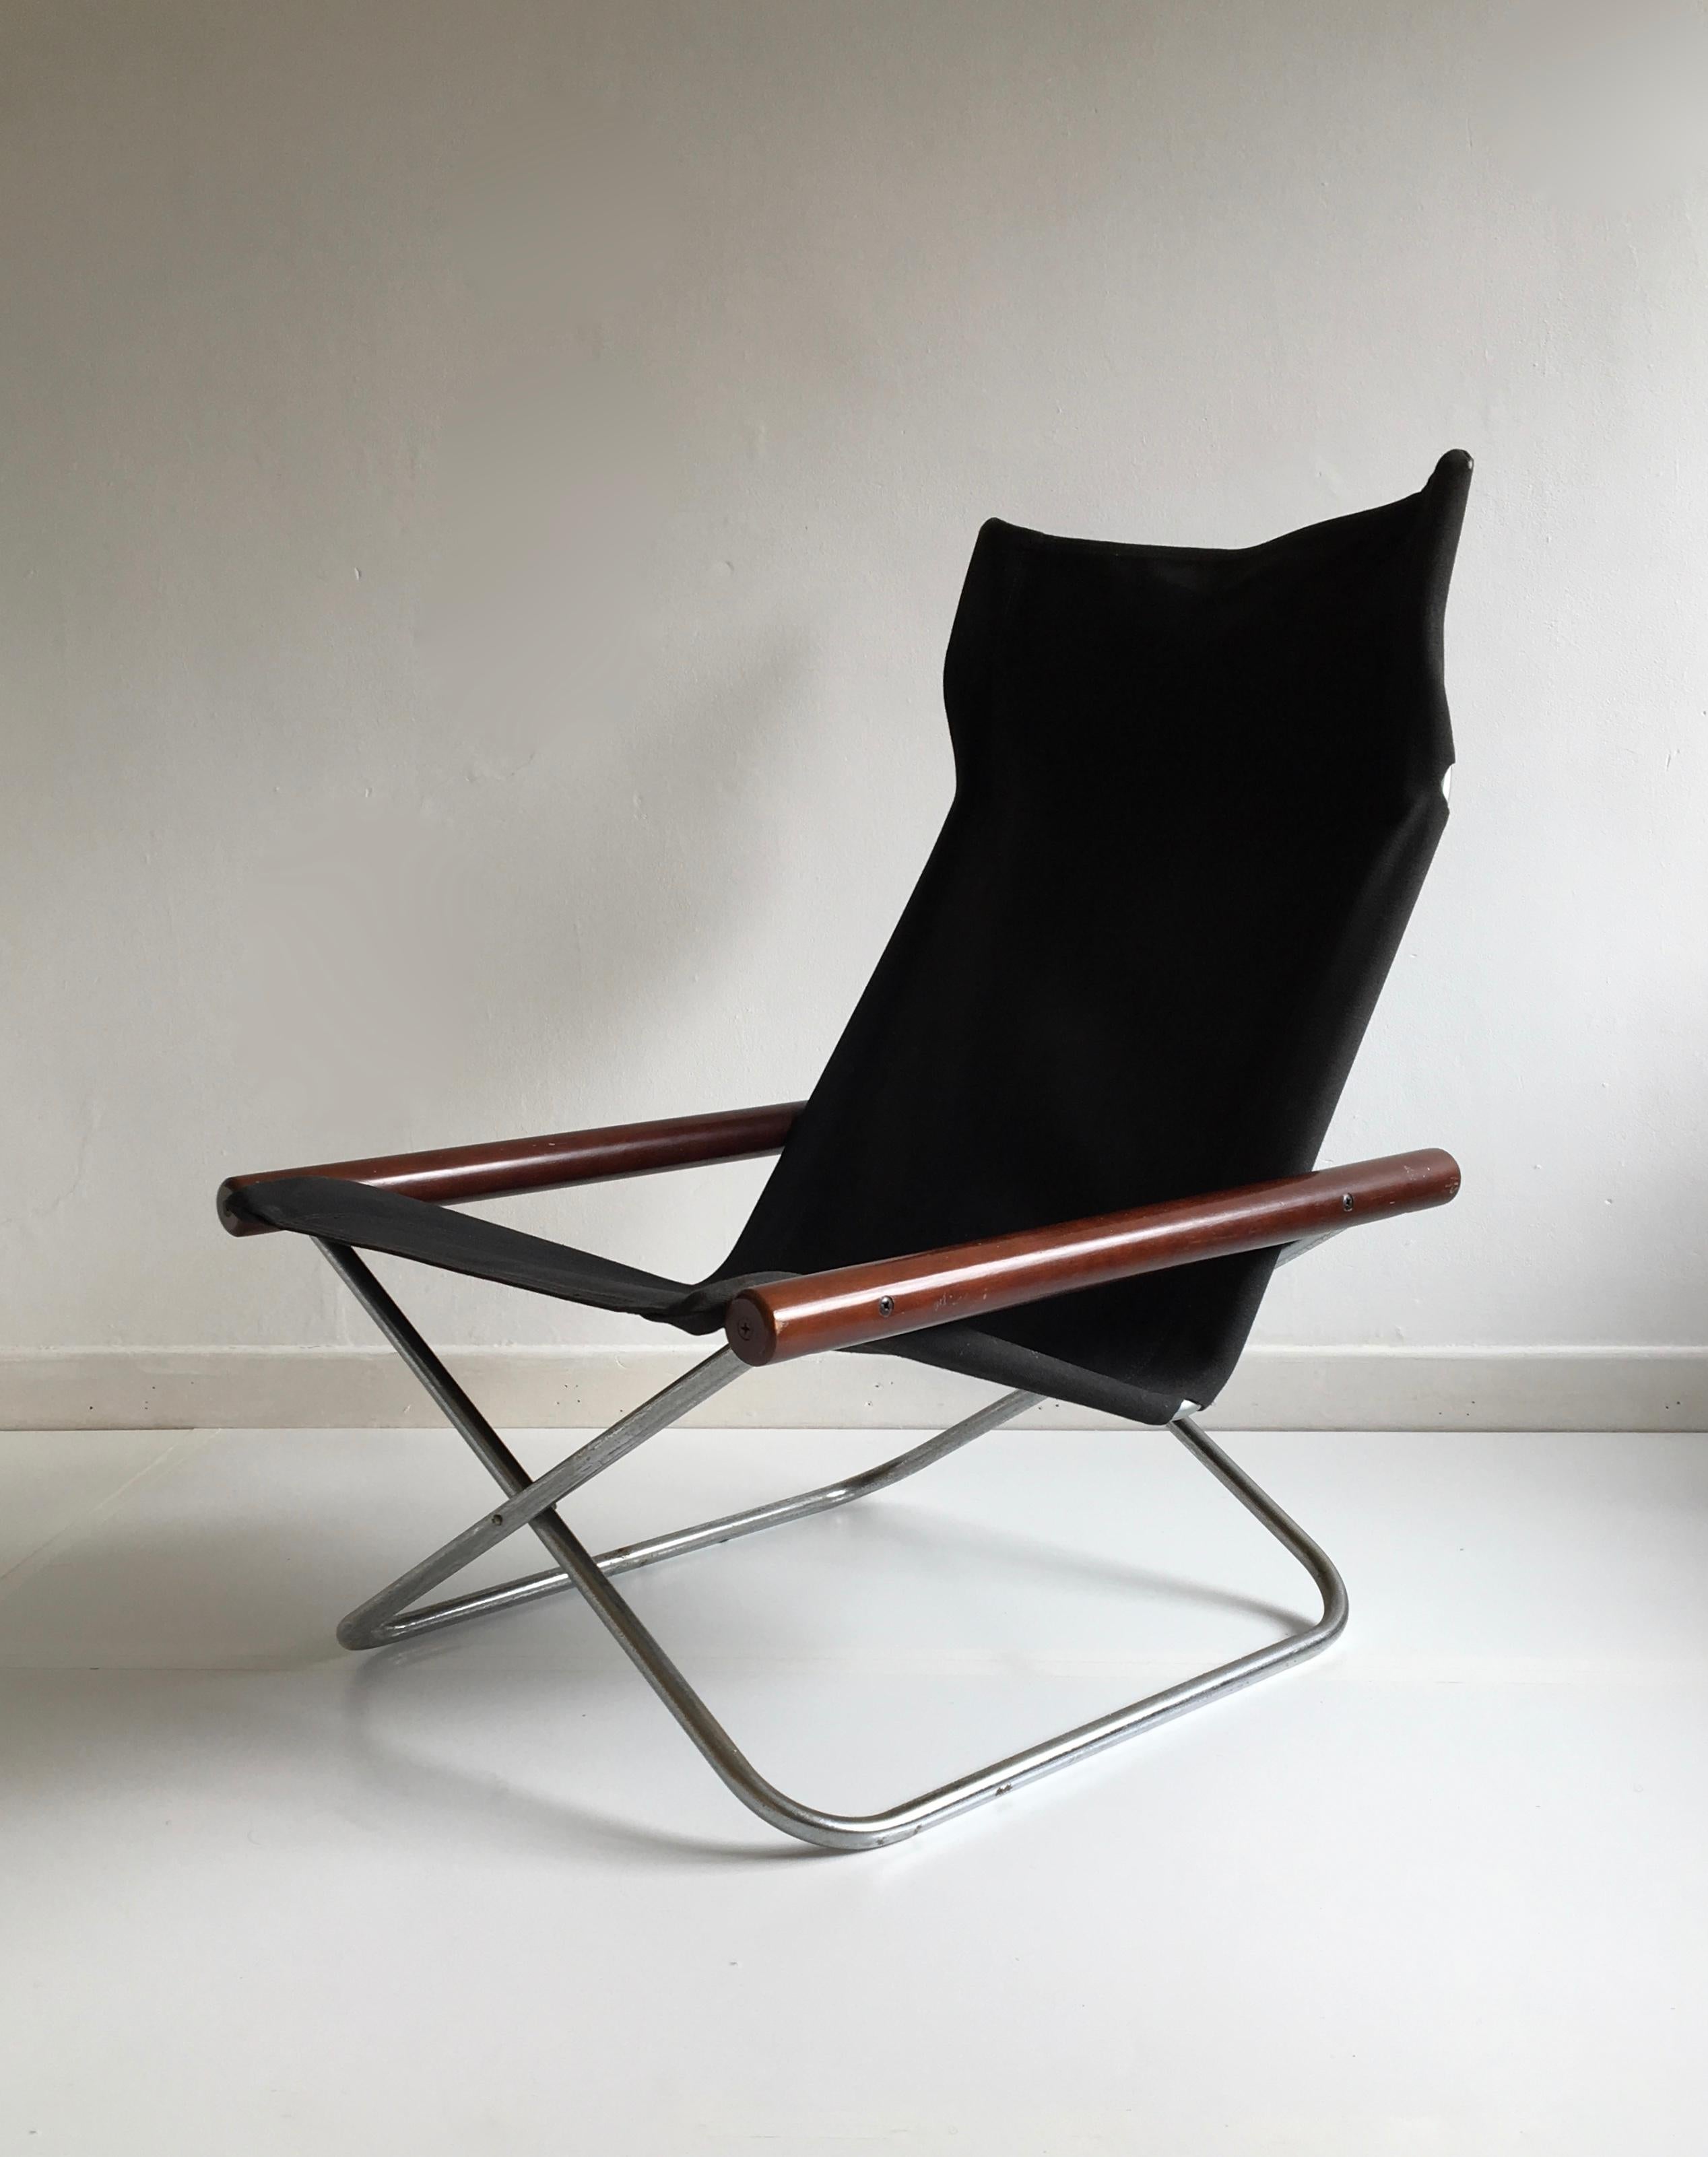 The chair was named 'NY' after the designer's family name, meaning 'new' in Danish. It has won many awards and became a permanent feature in the MOMA collection in 1970.

Dimensions (cm, approximate)
Height 86
Width 61
Depth 75.